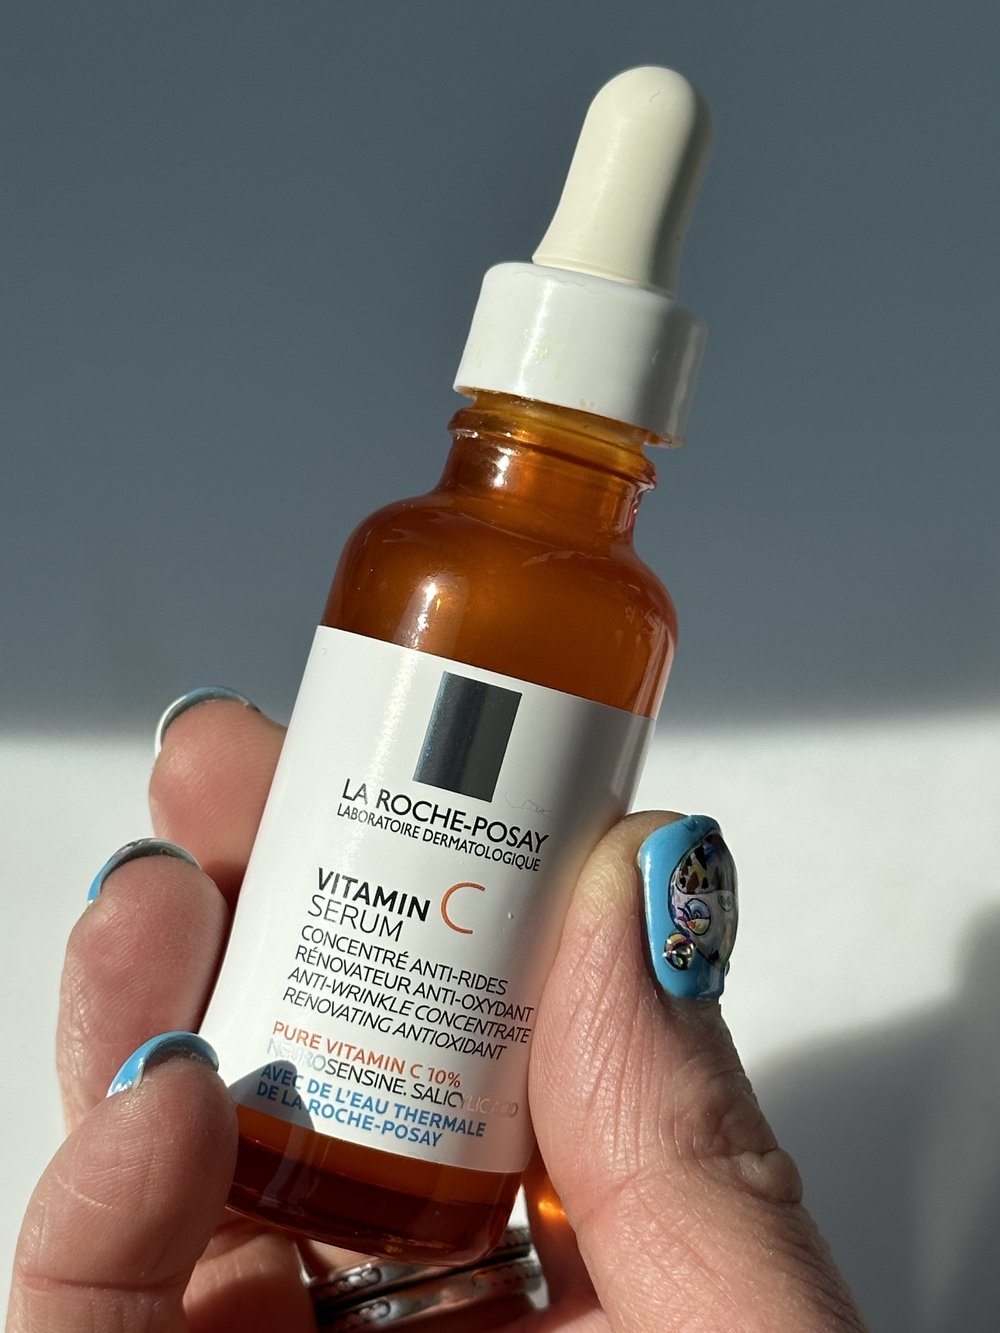 dyr svinekød ånd PRODUCT REVIEW: LA ROCHE-POSAY 10% PURE VITAMIN C FACE SERUM PROS AND CONS